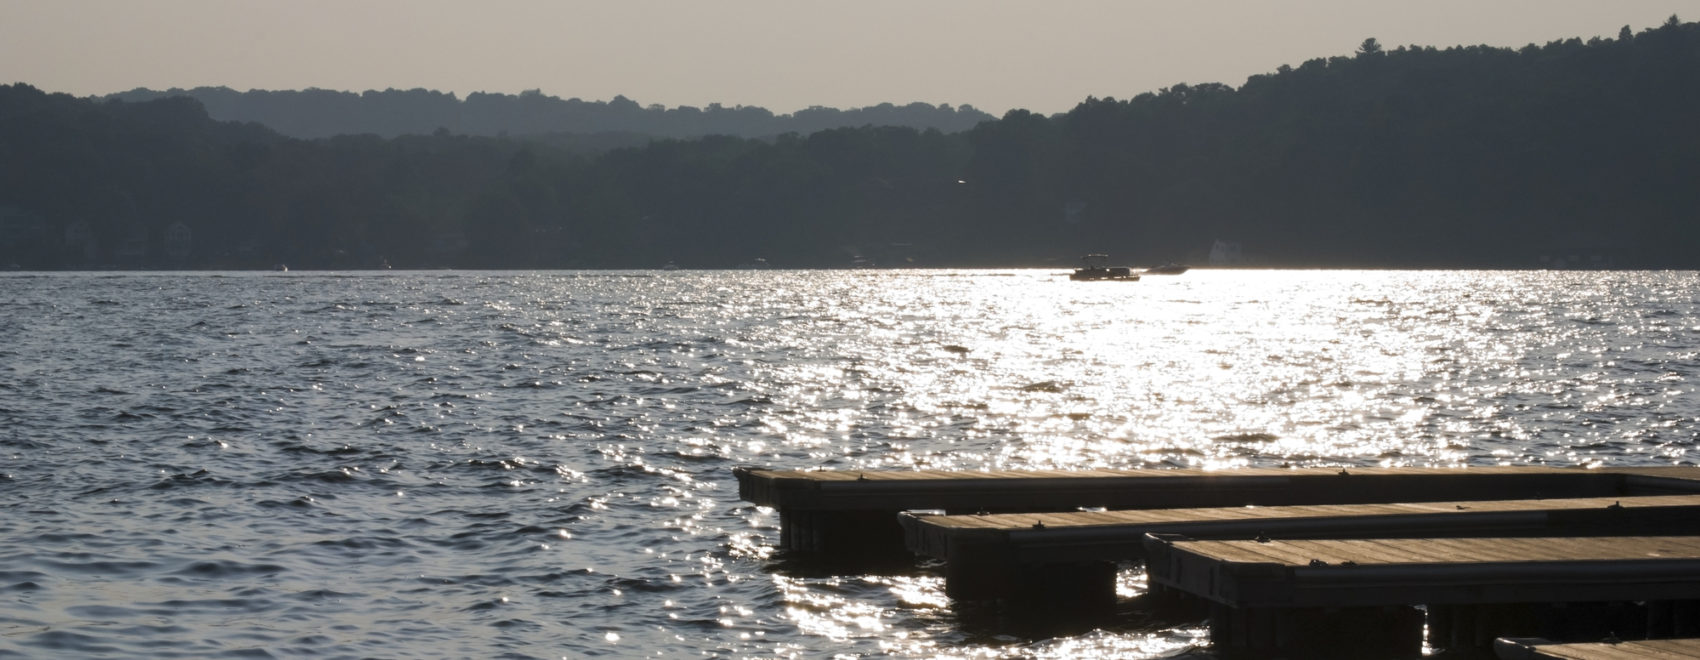 Late Summer sunlight on Lake Hopatcong in New Jersey.